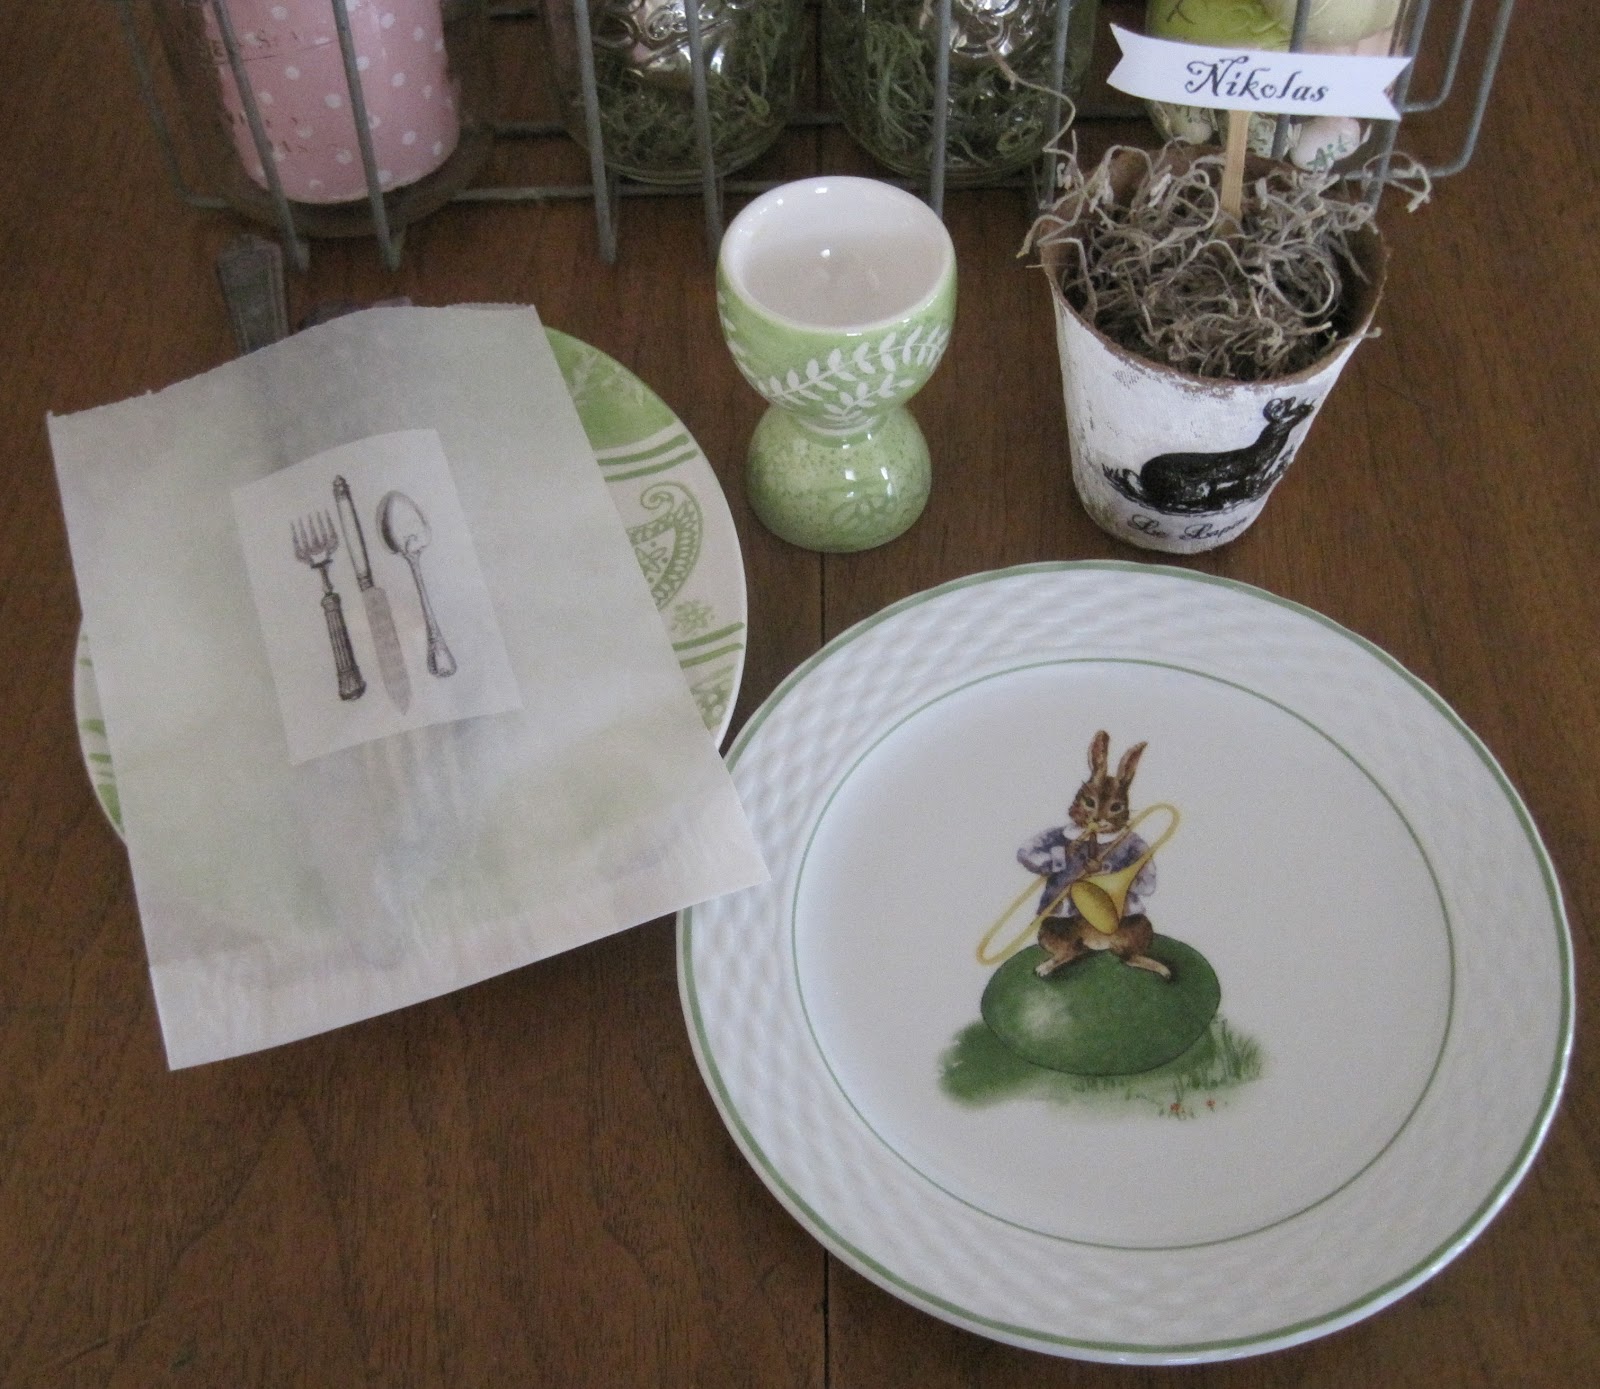 and match plates because the ones you see I got from the Pottery Barn ...